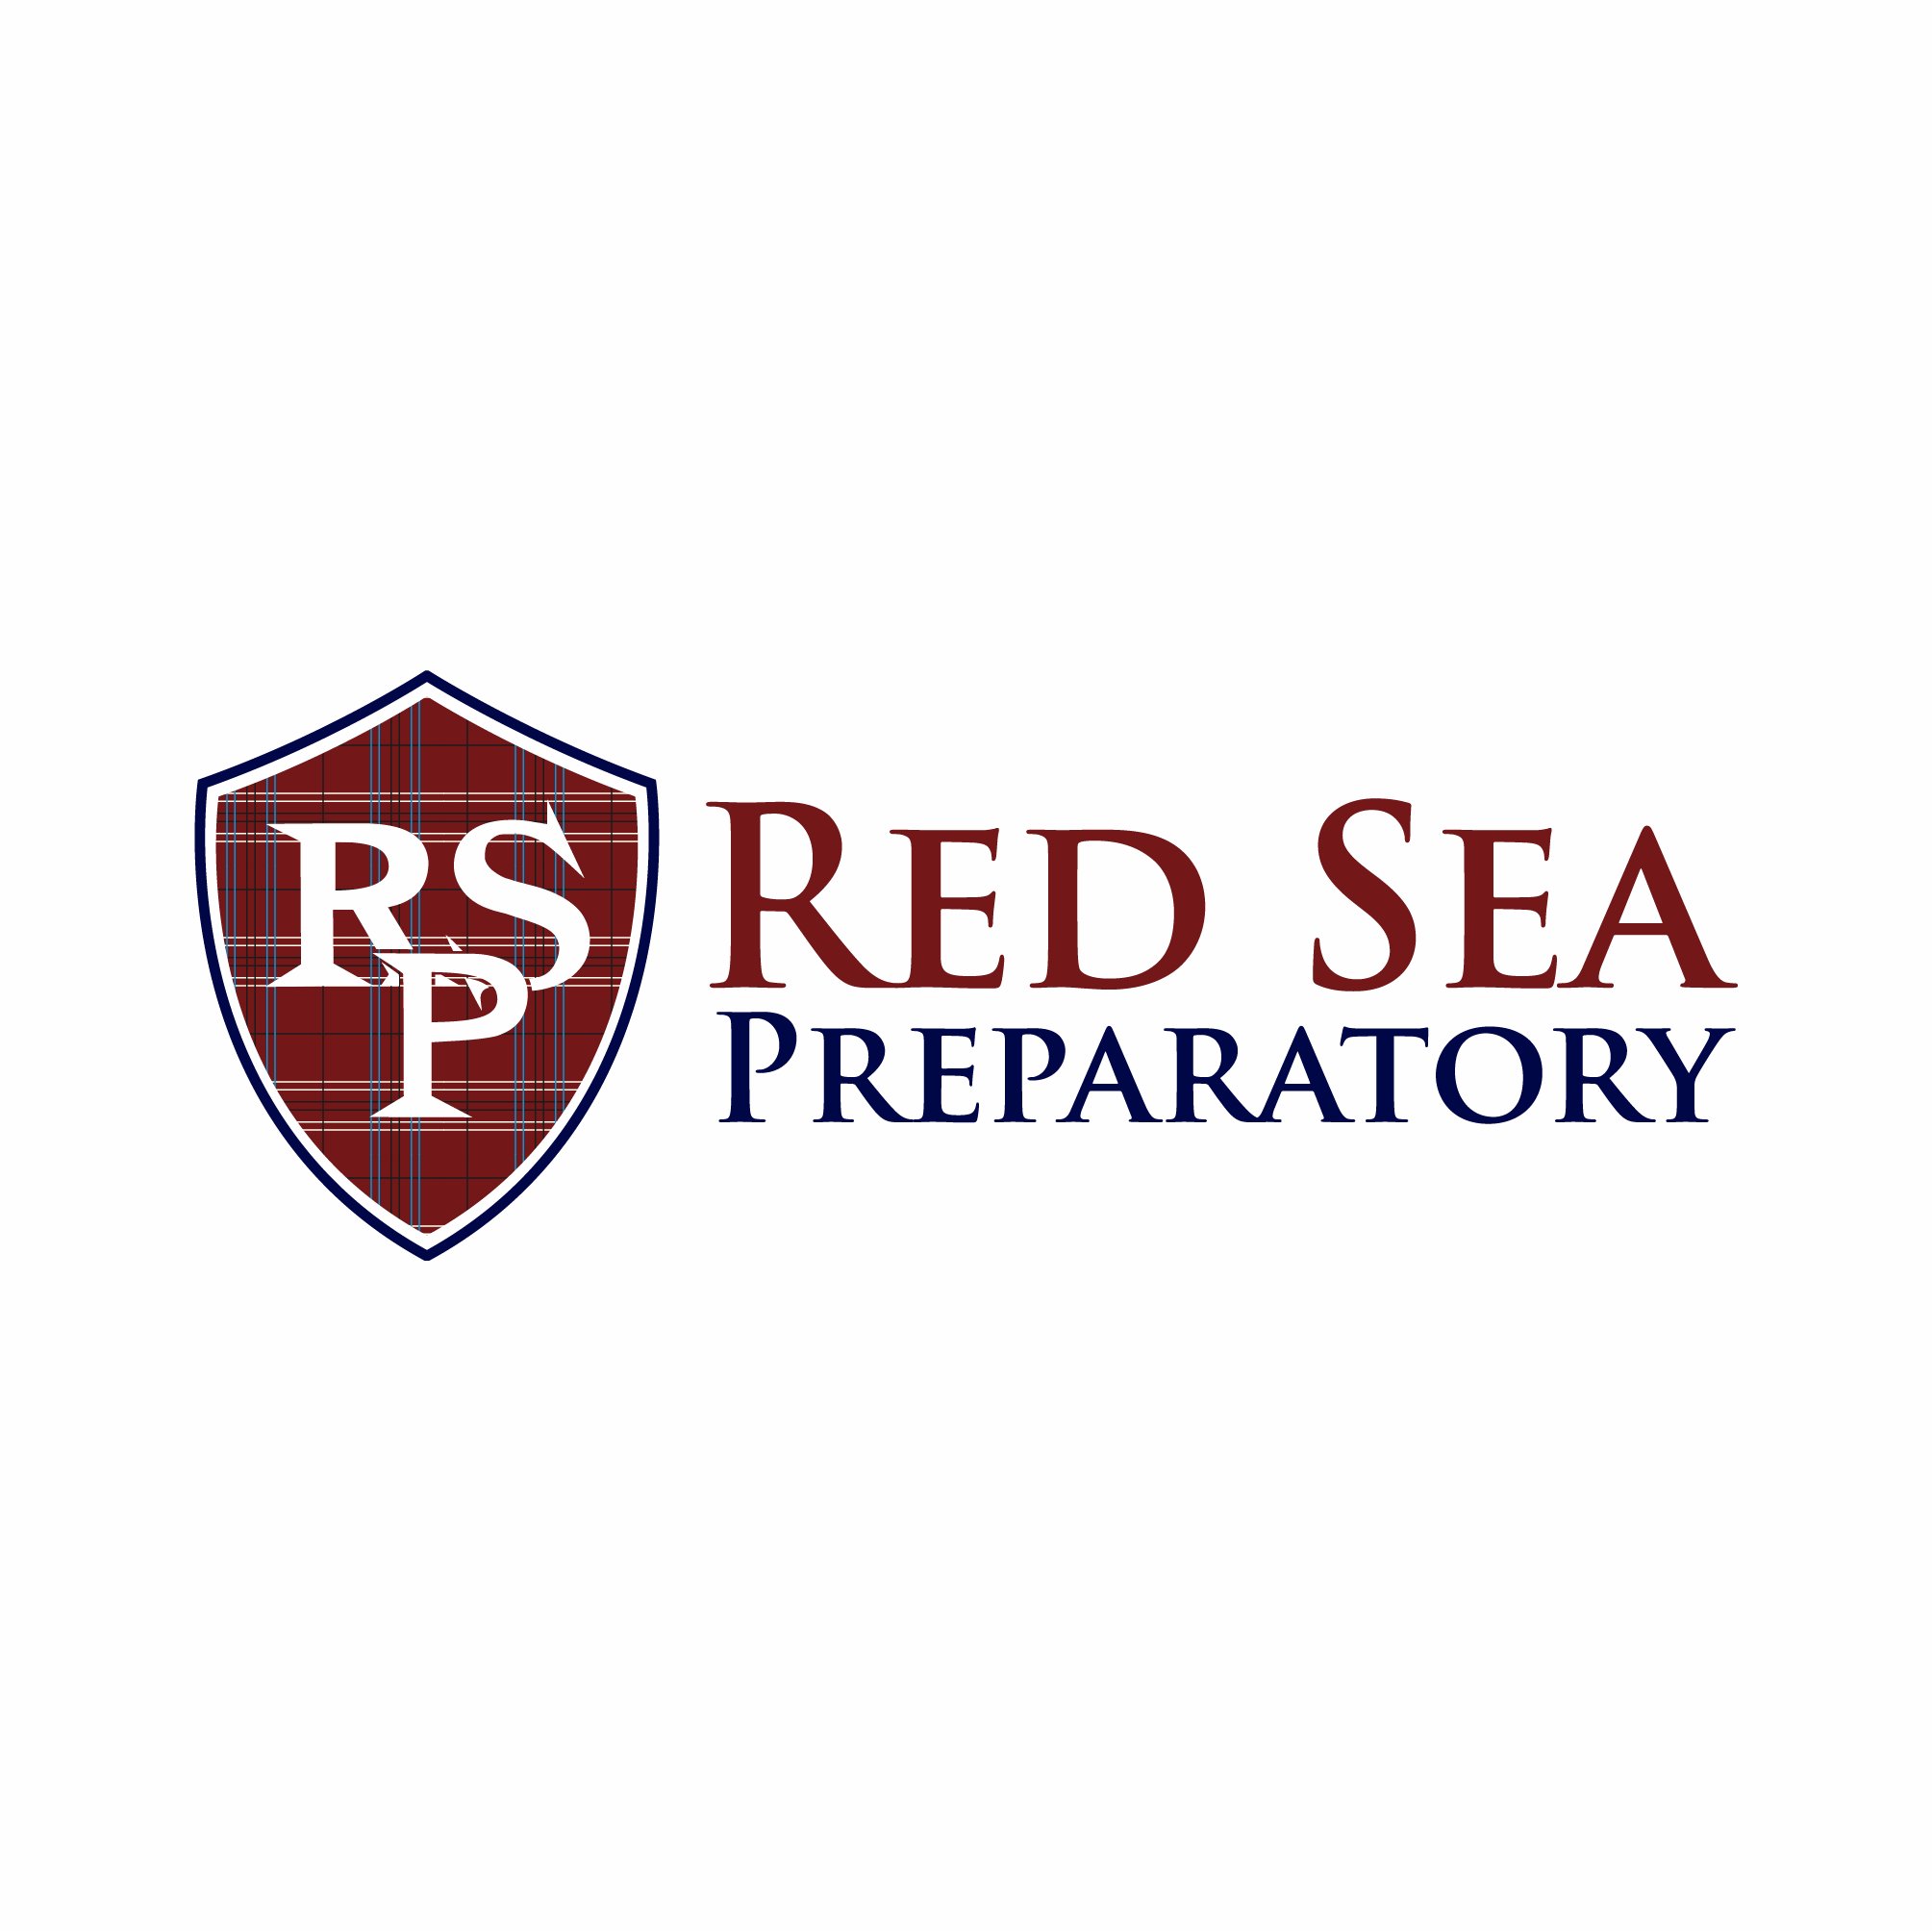 Red Sea Preparatory Academy offers intensive courses that provide thorough teaching on various pertinent aspects of our faith. Let’s talk about the hard things!